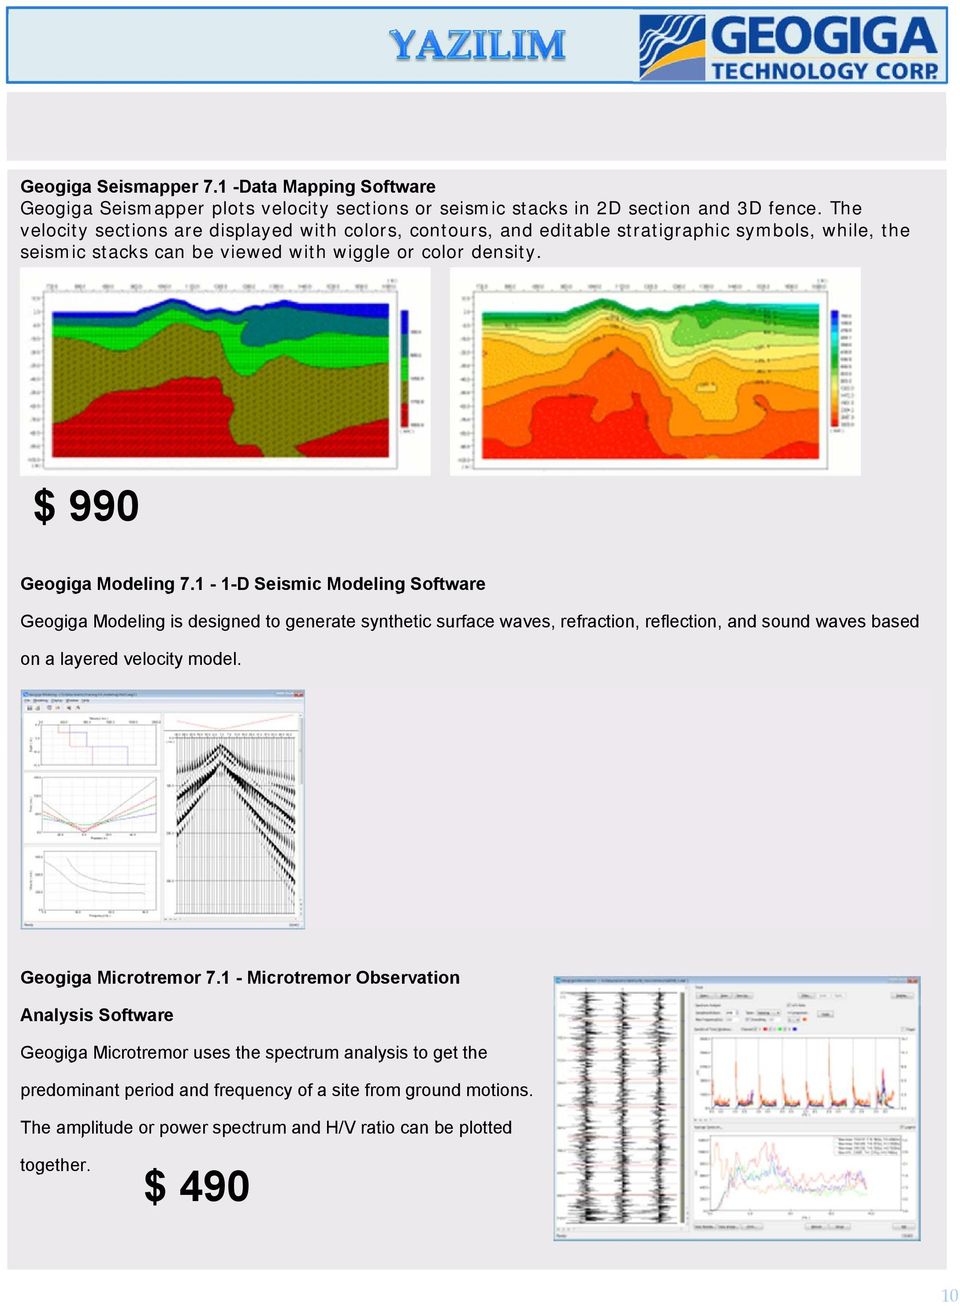 1-1-D Seismic Modeling Software Geogiga Modeling is designed to generate synthetic surface waves, refraction, reflection, and sound waves based on a layered velocity model.